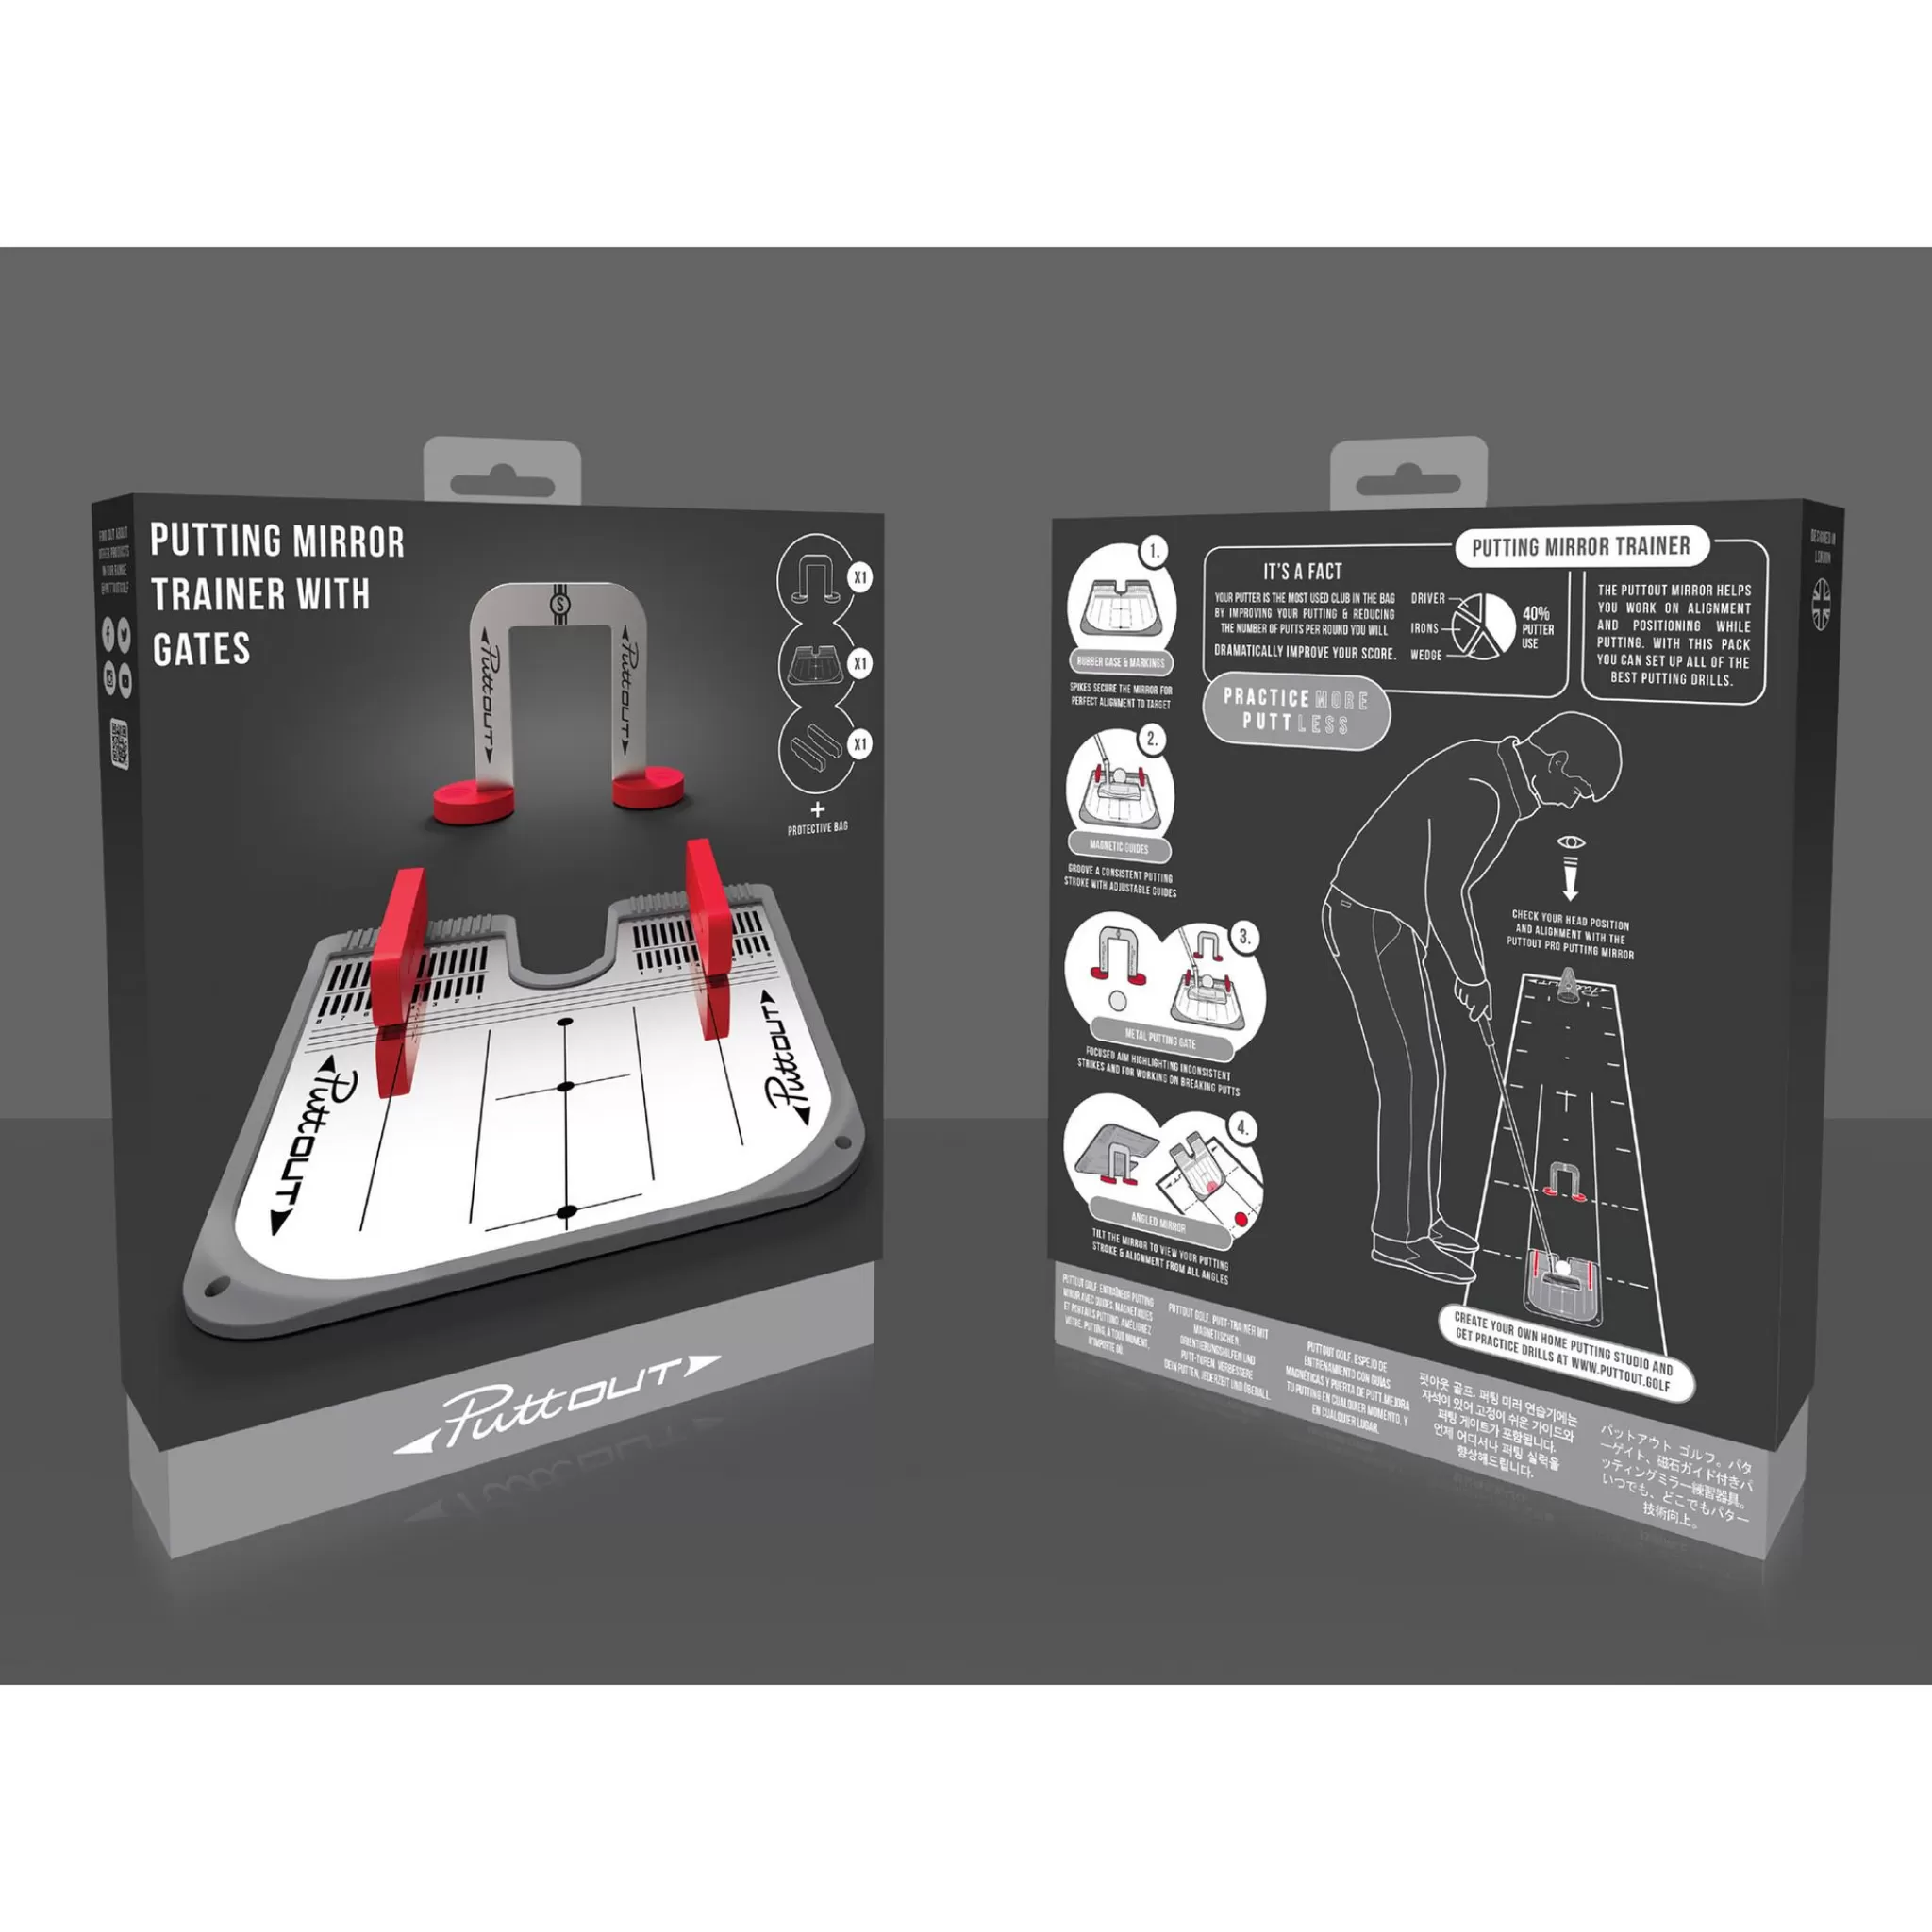 Discount PUTT OUT Mirror Putting System